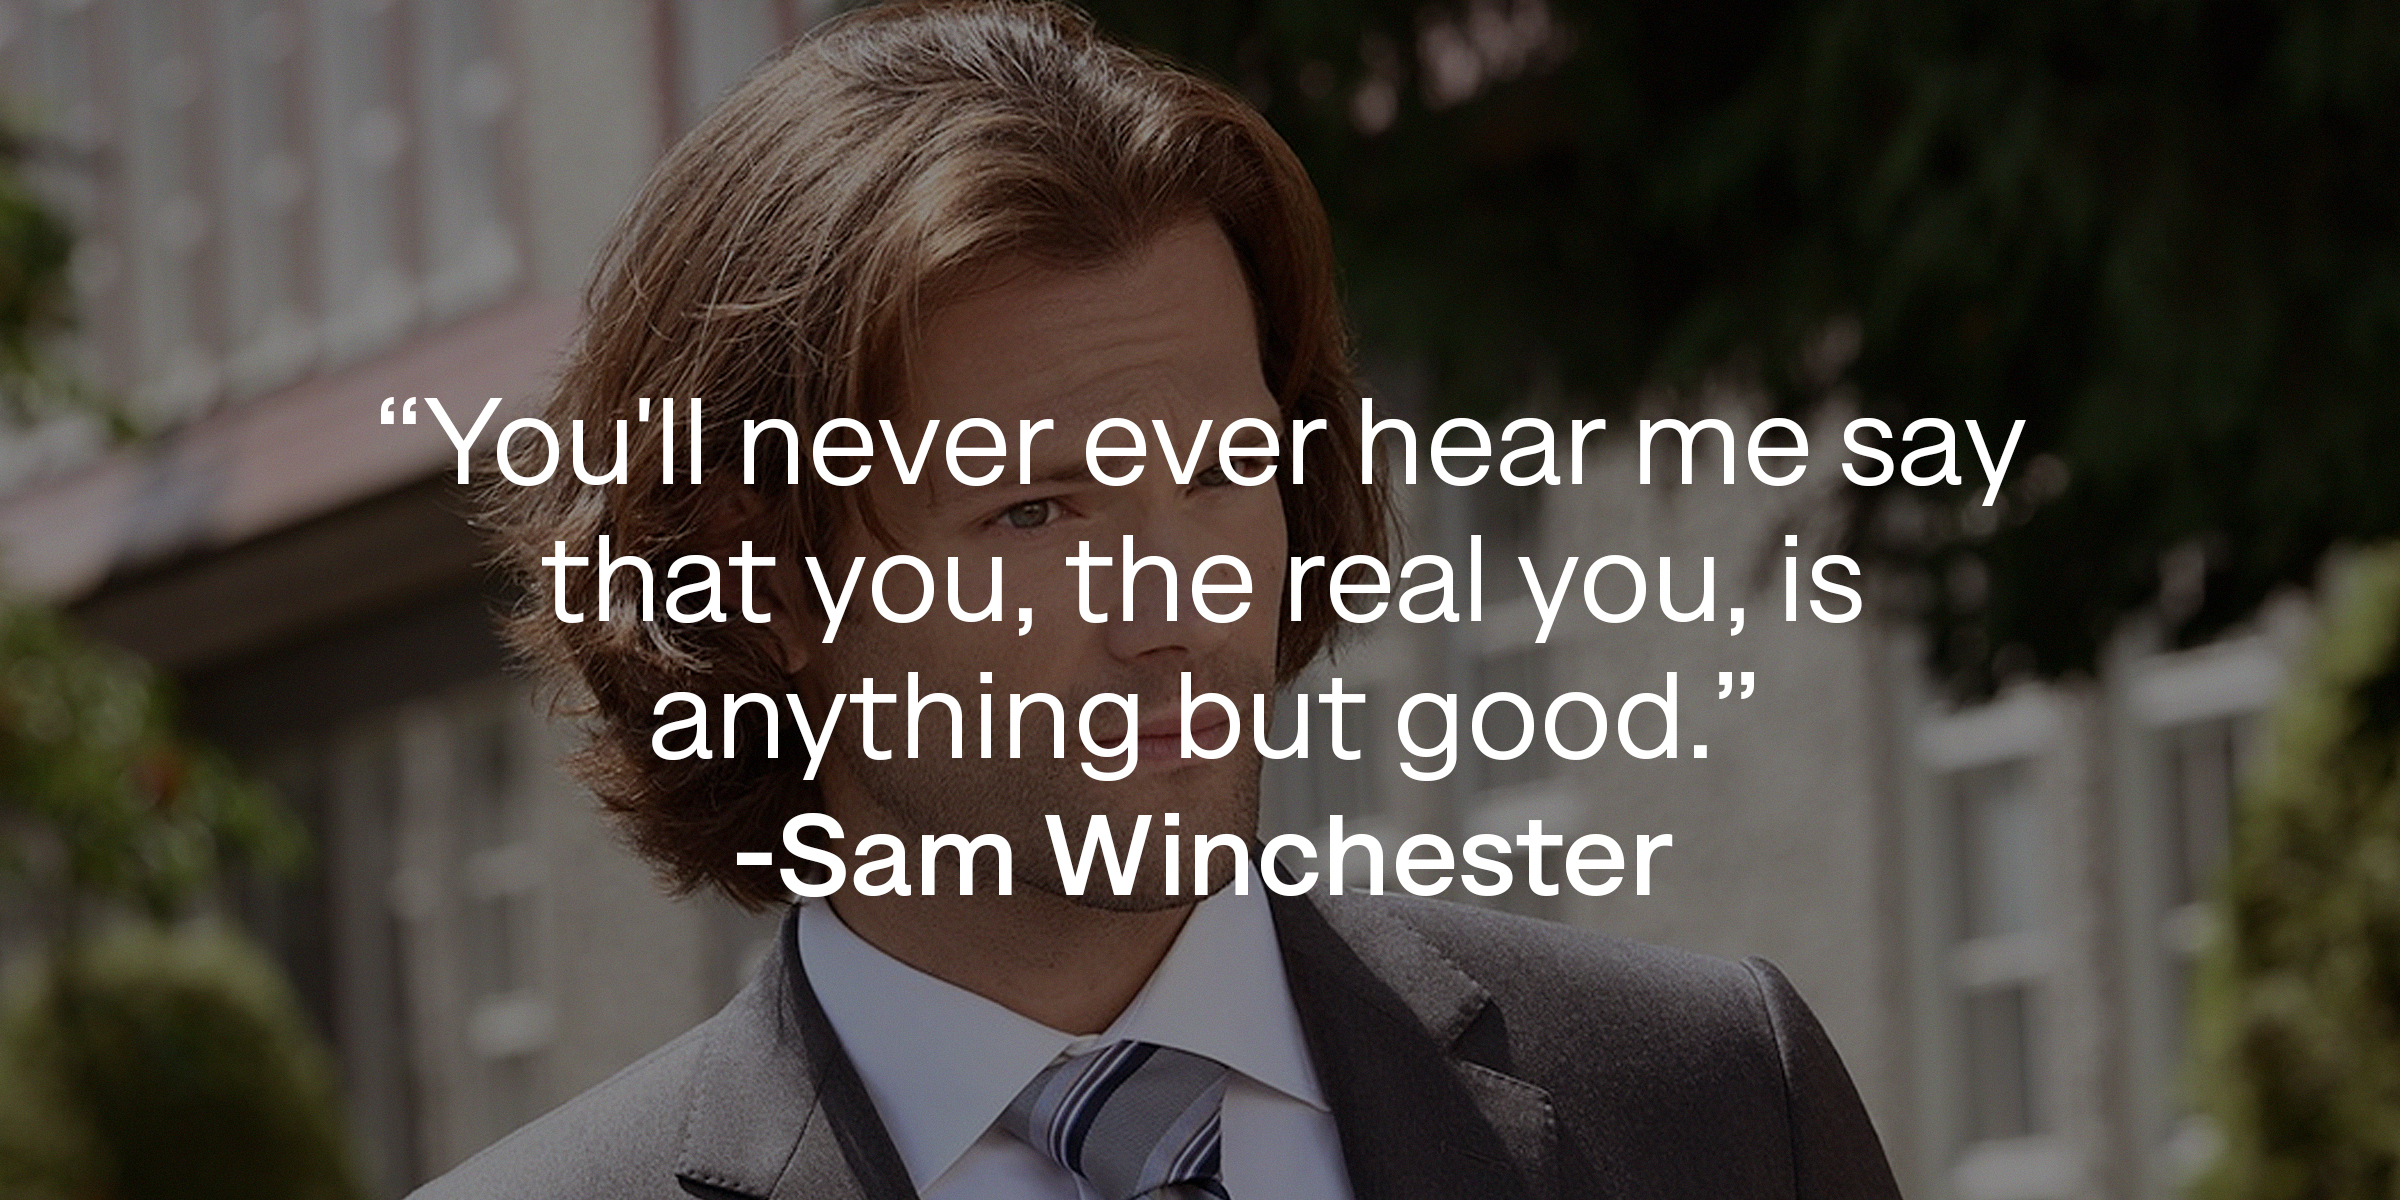 Photo of Sam Winchester with the quote: "You'll never ever hear me say that you, the real you, is anything but good." | Source: Facebook.com/Supernatural